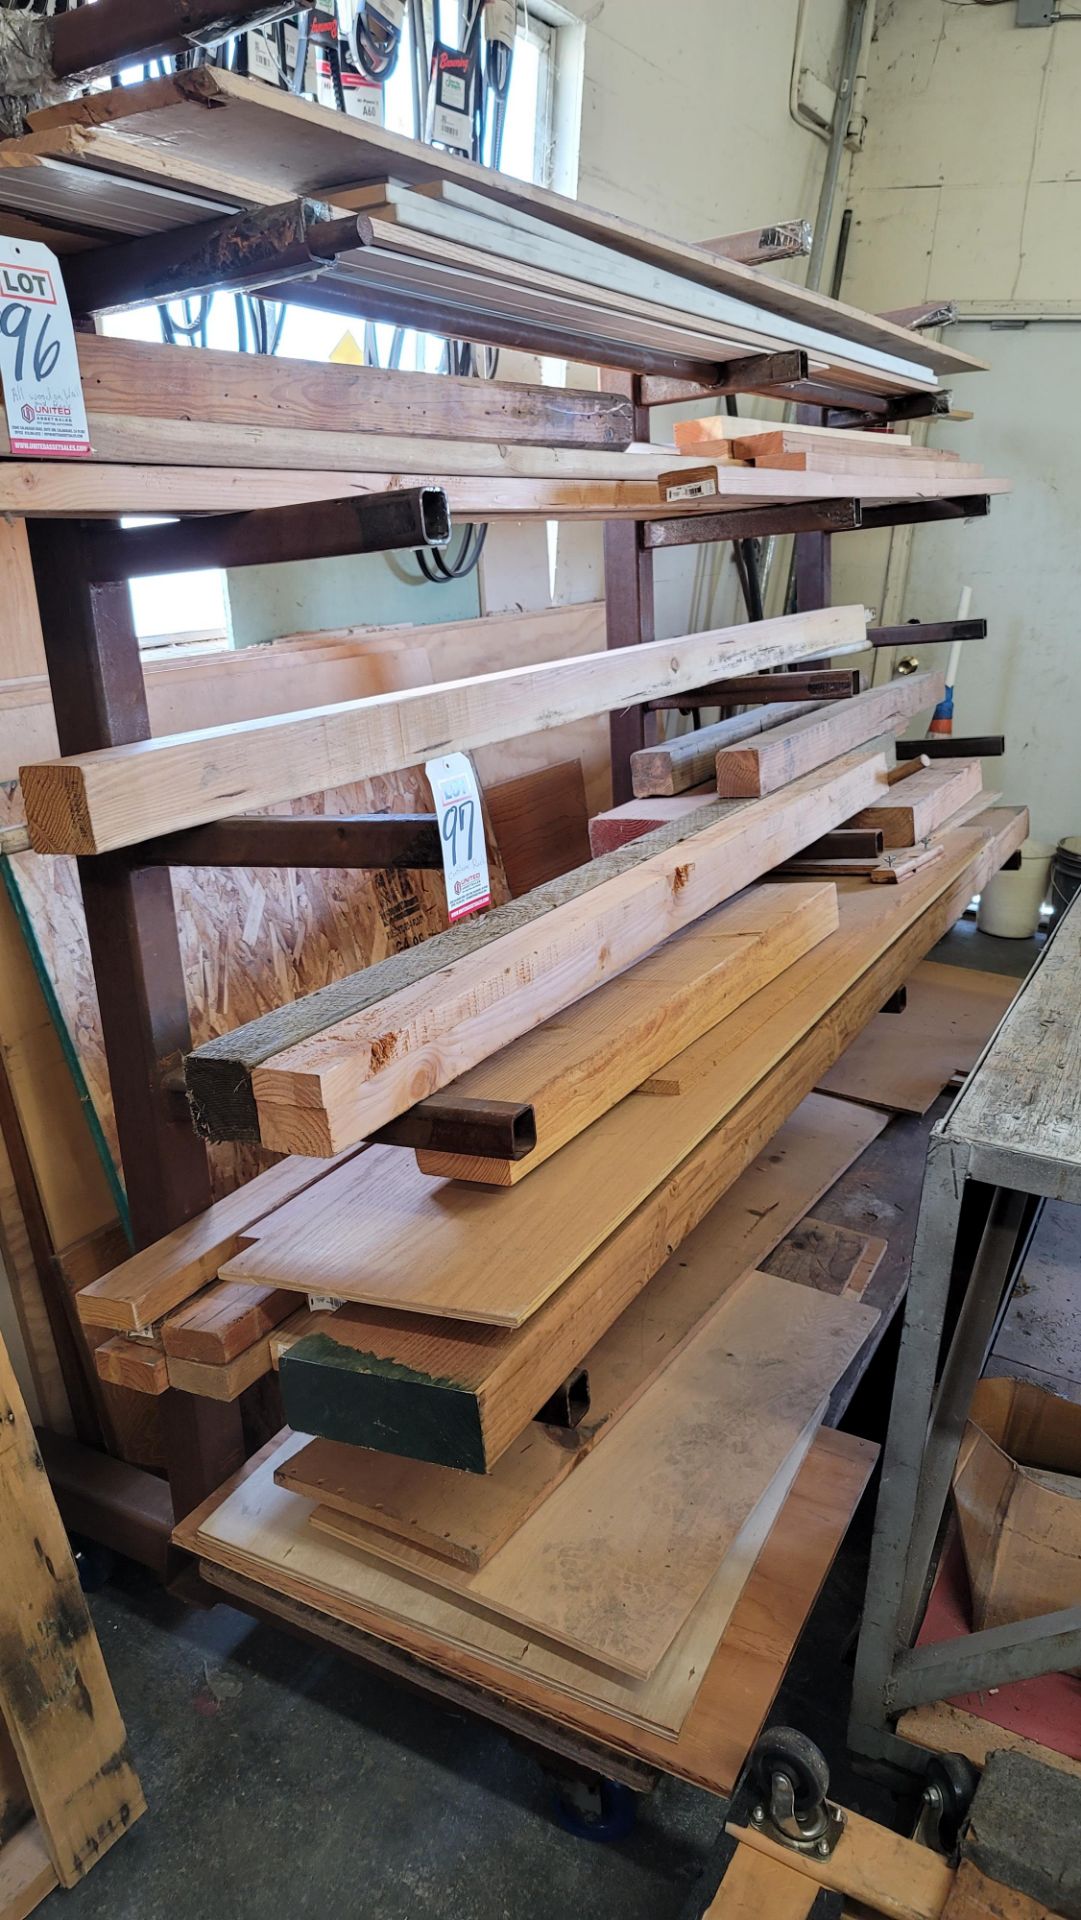 LOT - ALL LUMBER ON RACK AND PLYWOOD BEHIND RACK, RACK NOT INCLUDED